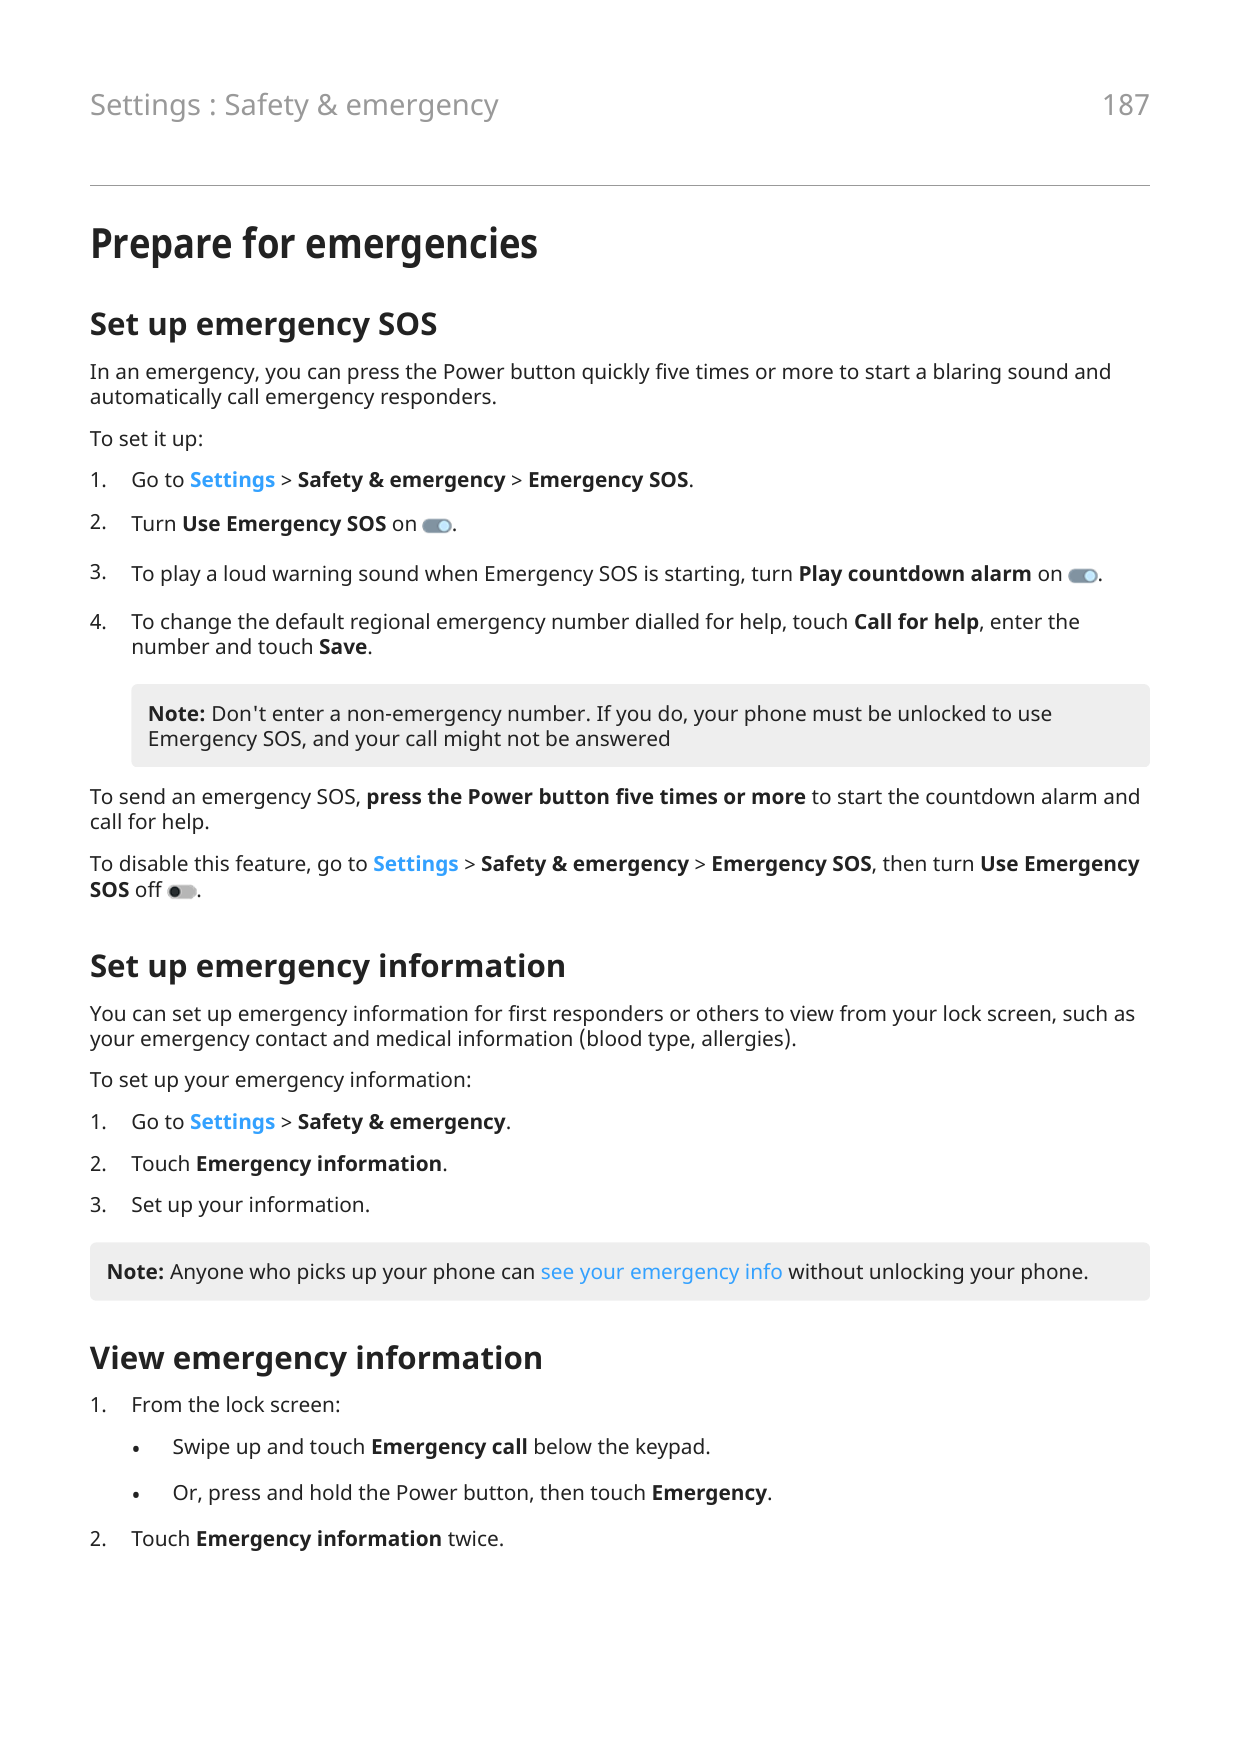 Settings : Safety & emergency187Prepare for emergenciesSet up emergency SOSIn an emergency, you can press the Power button quick